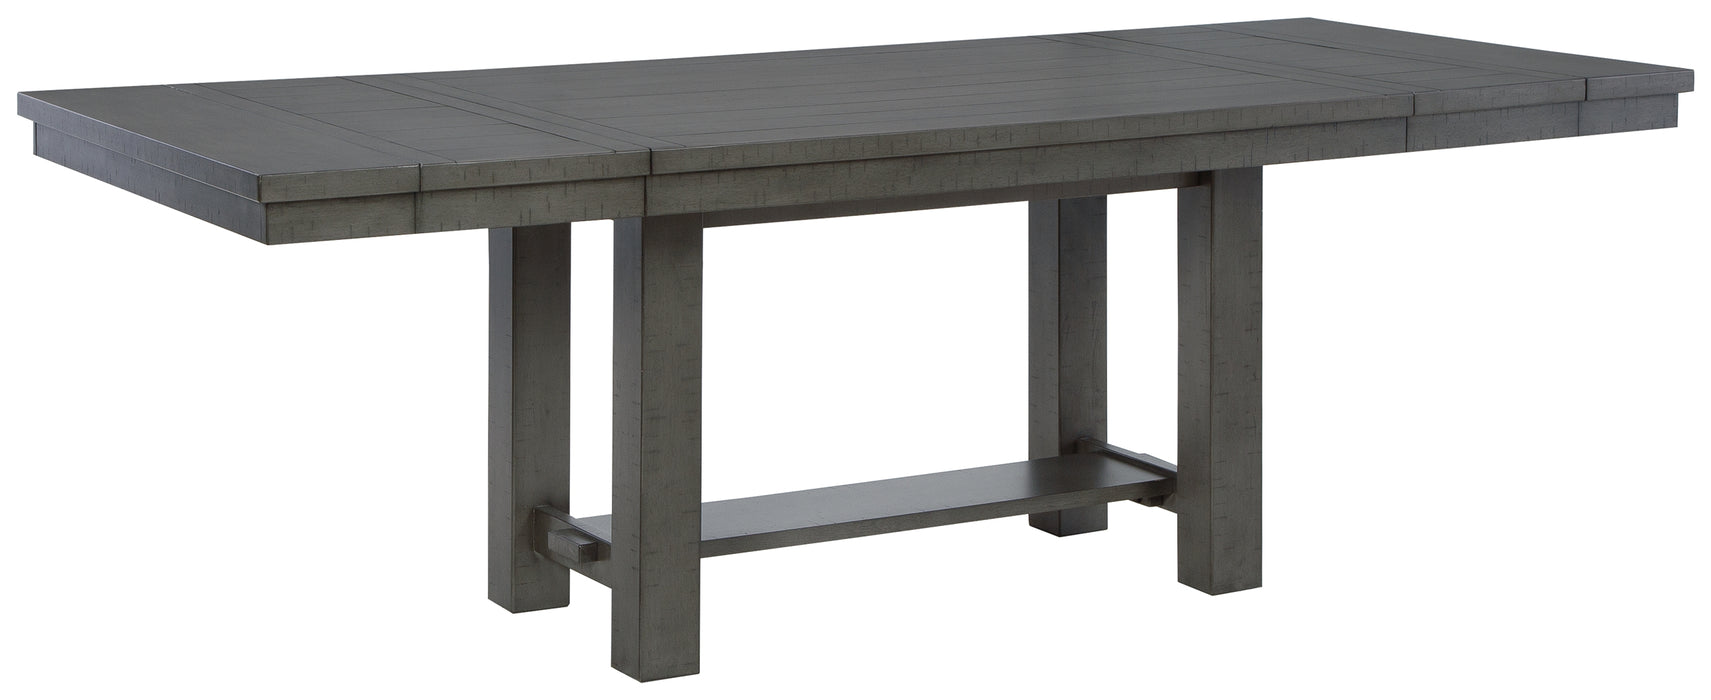 Myshanna Dining Extension Table - D629-45 - Gate Furniture